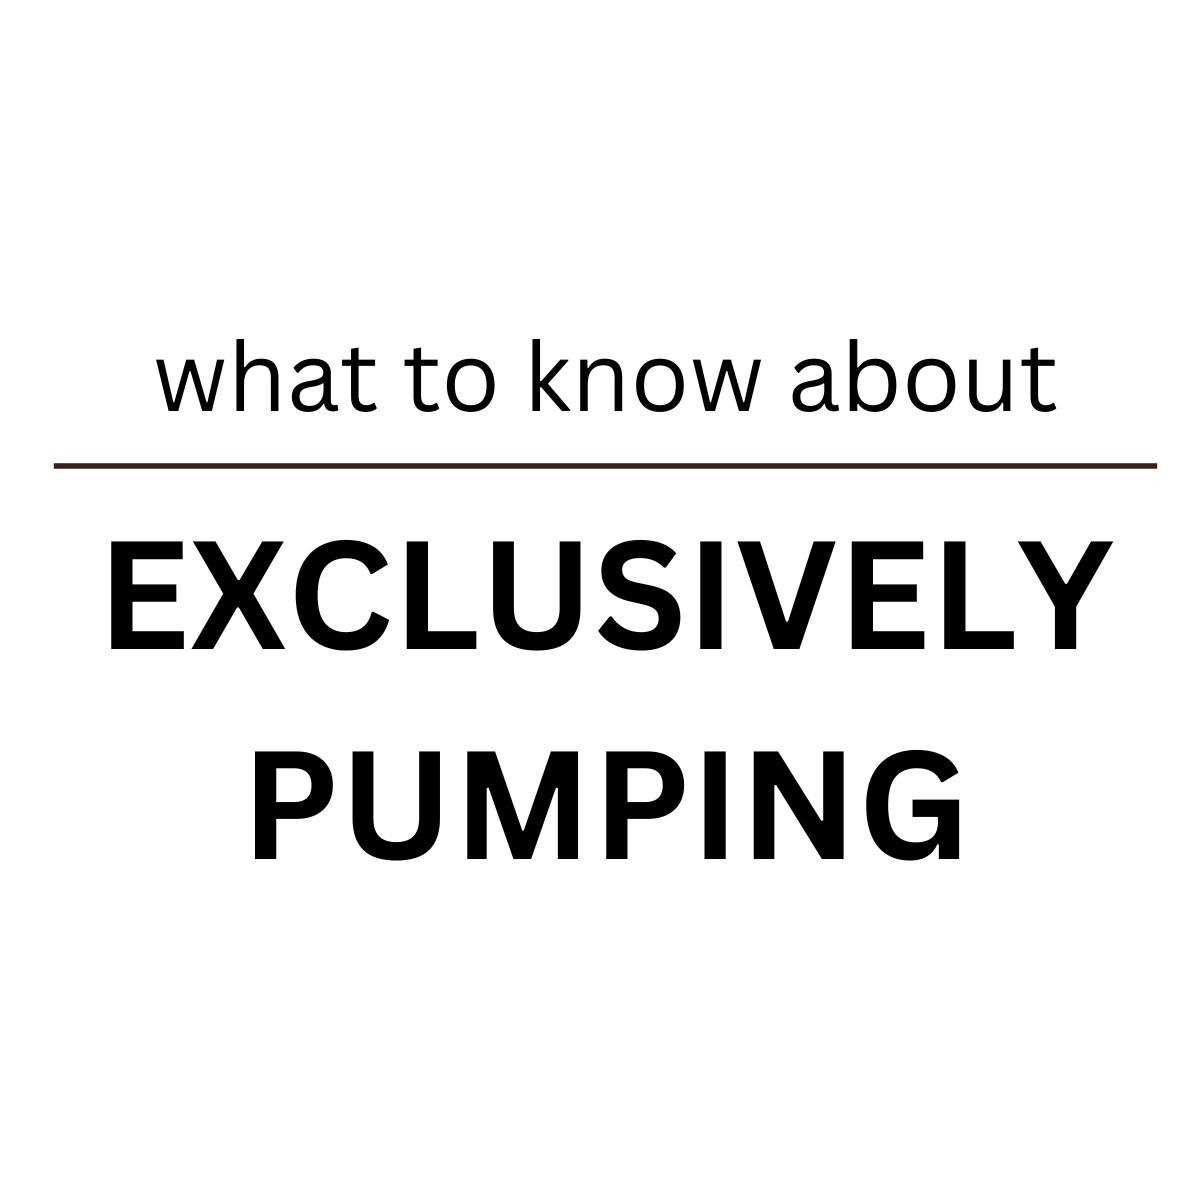 Exclusively pumping is something that I have grown very passionate about and it's my home that this will bring awareness, understanding and provide helpful tips to other moms out there. Whether you're exclusively pumping, breastfeeding or doing a combination, this post is here to provide helpful tips.